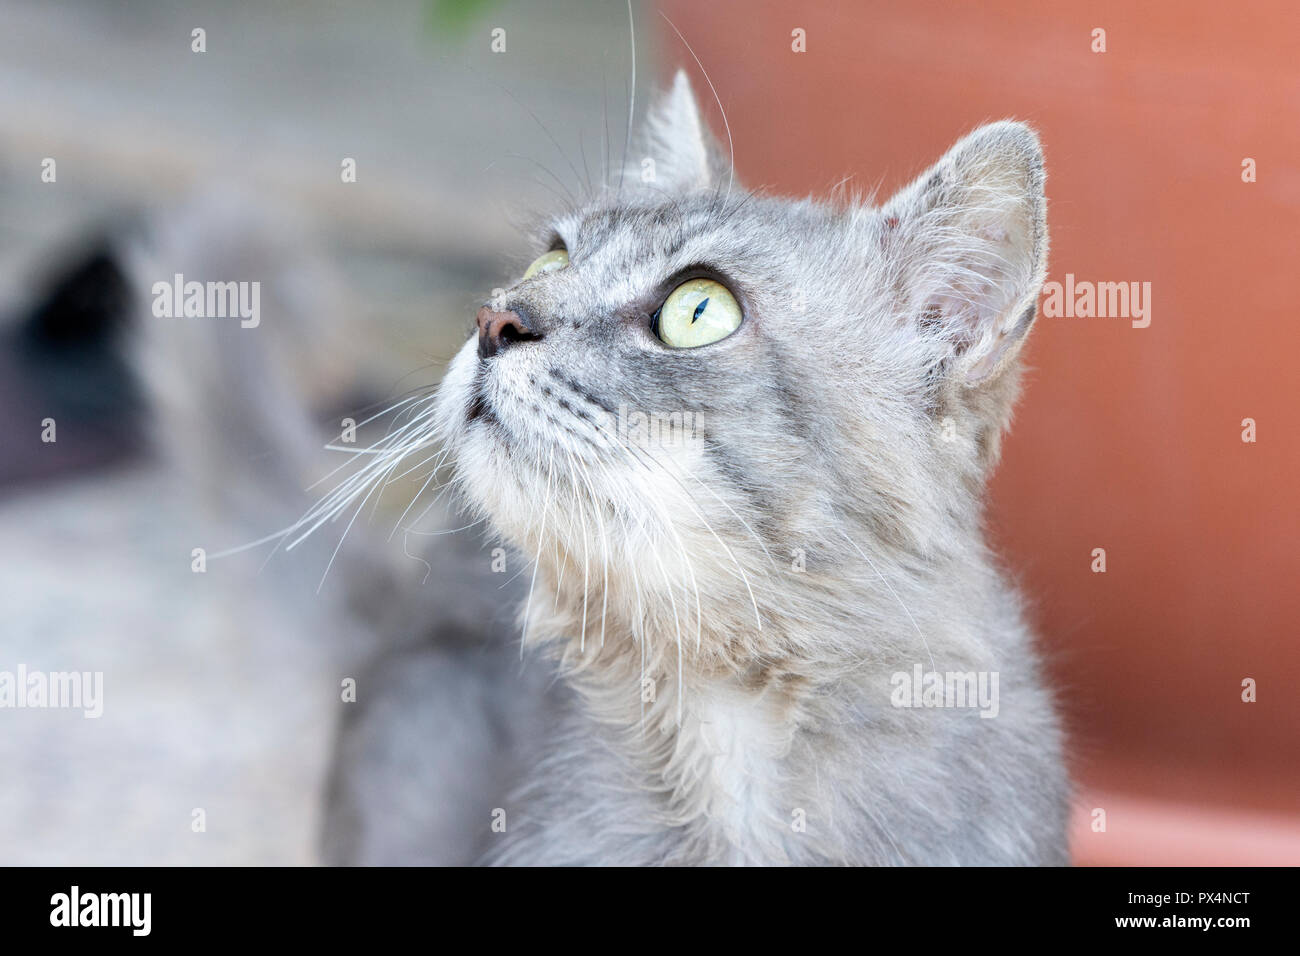 Closeup to gray cat with green eyes Stock Photo